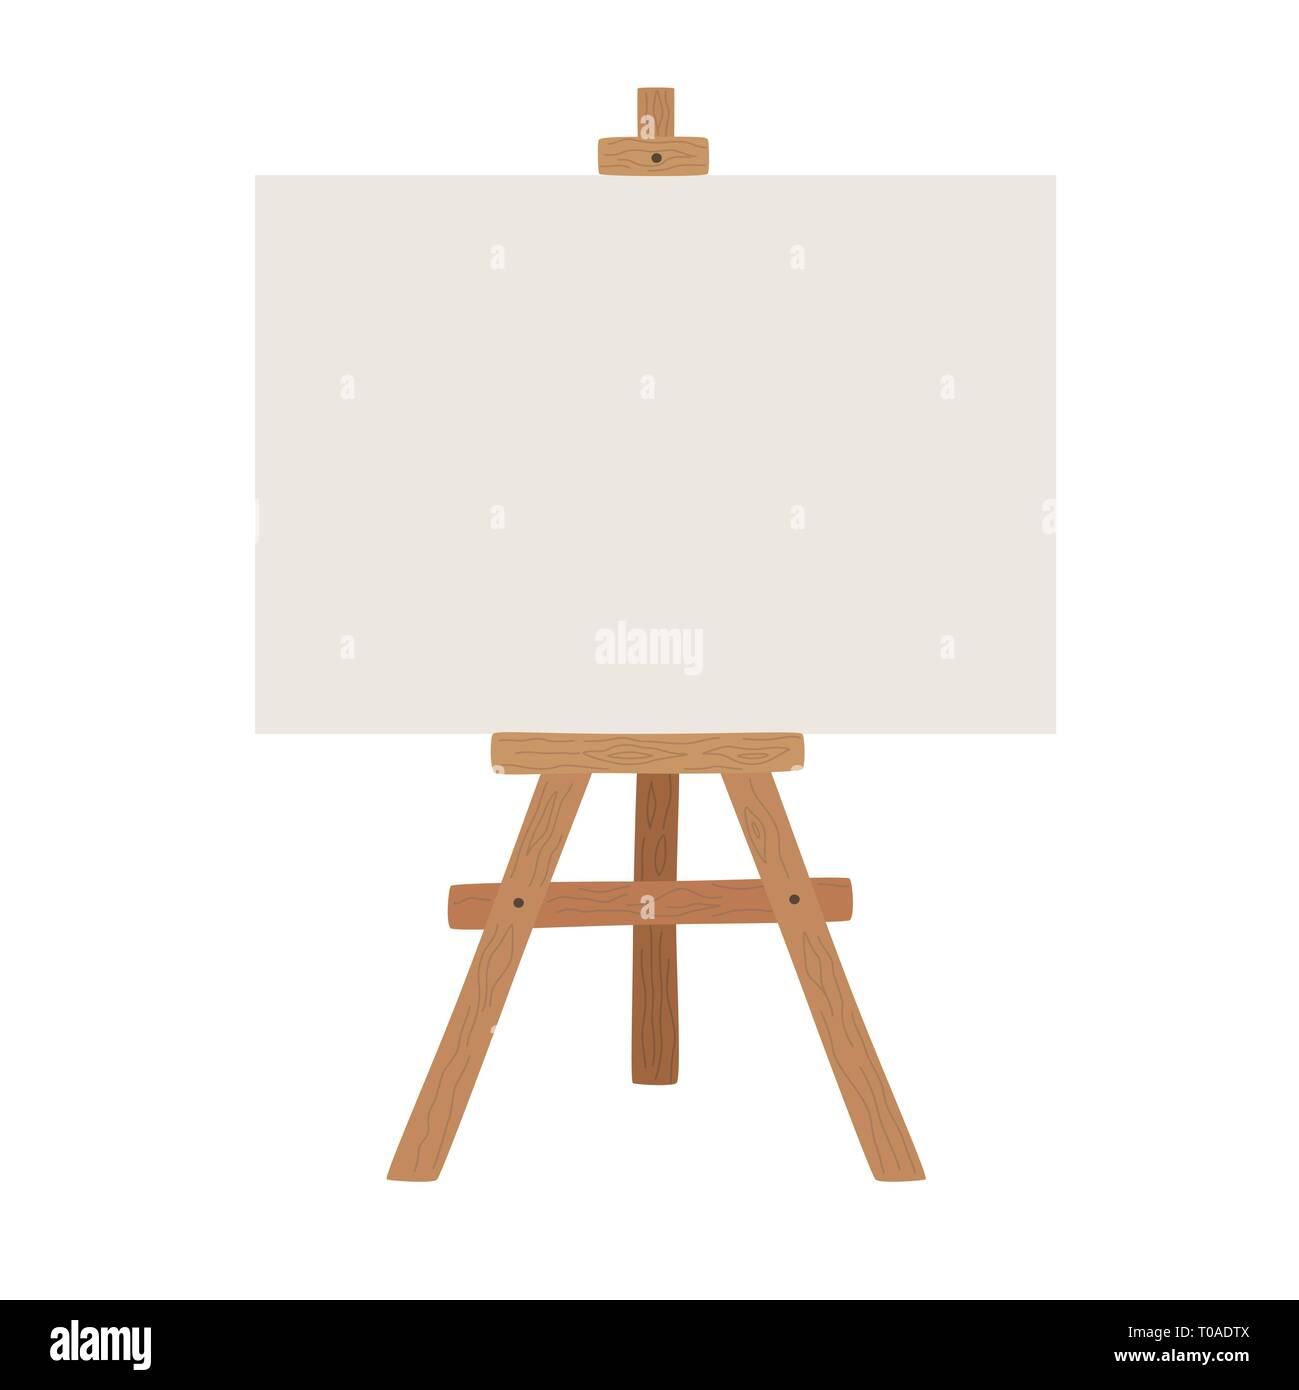 https://c8.alamy.com/comp/T0ADTX/blank-art-board-and-realistic-wooden-easel-wooden-brown-easel-with-mock-up-empty-blank-canvas-isolated-on-white-background-T0ADTX.jpg